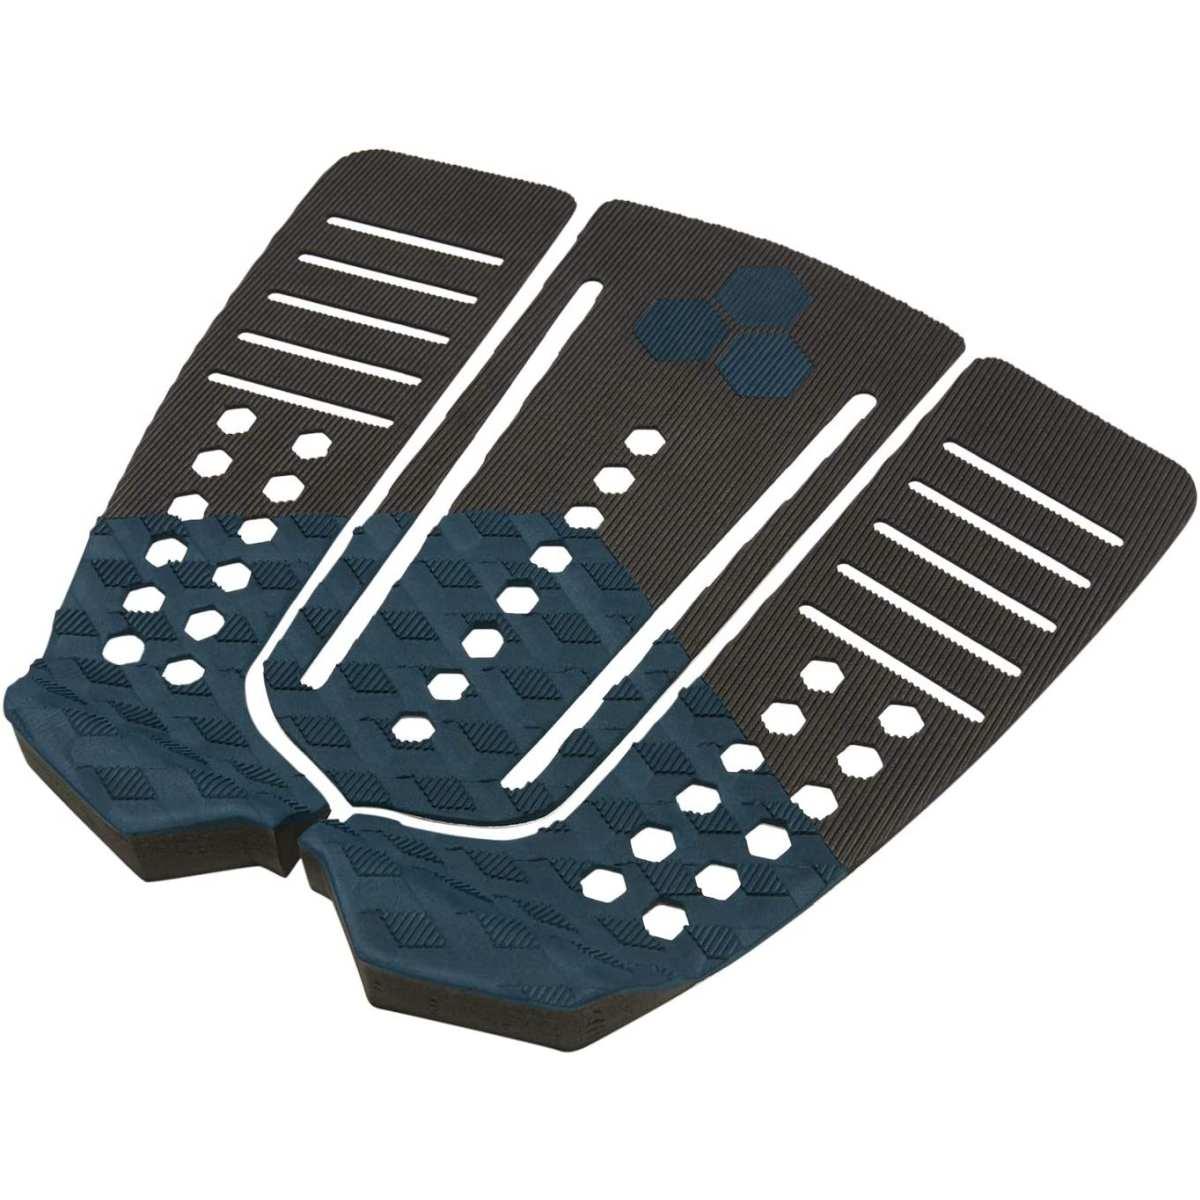 Traction pad 50/50 Flat